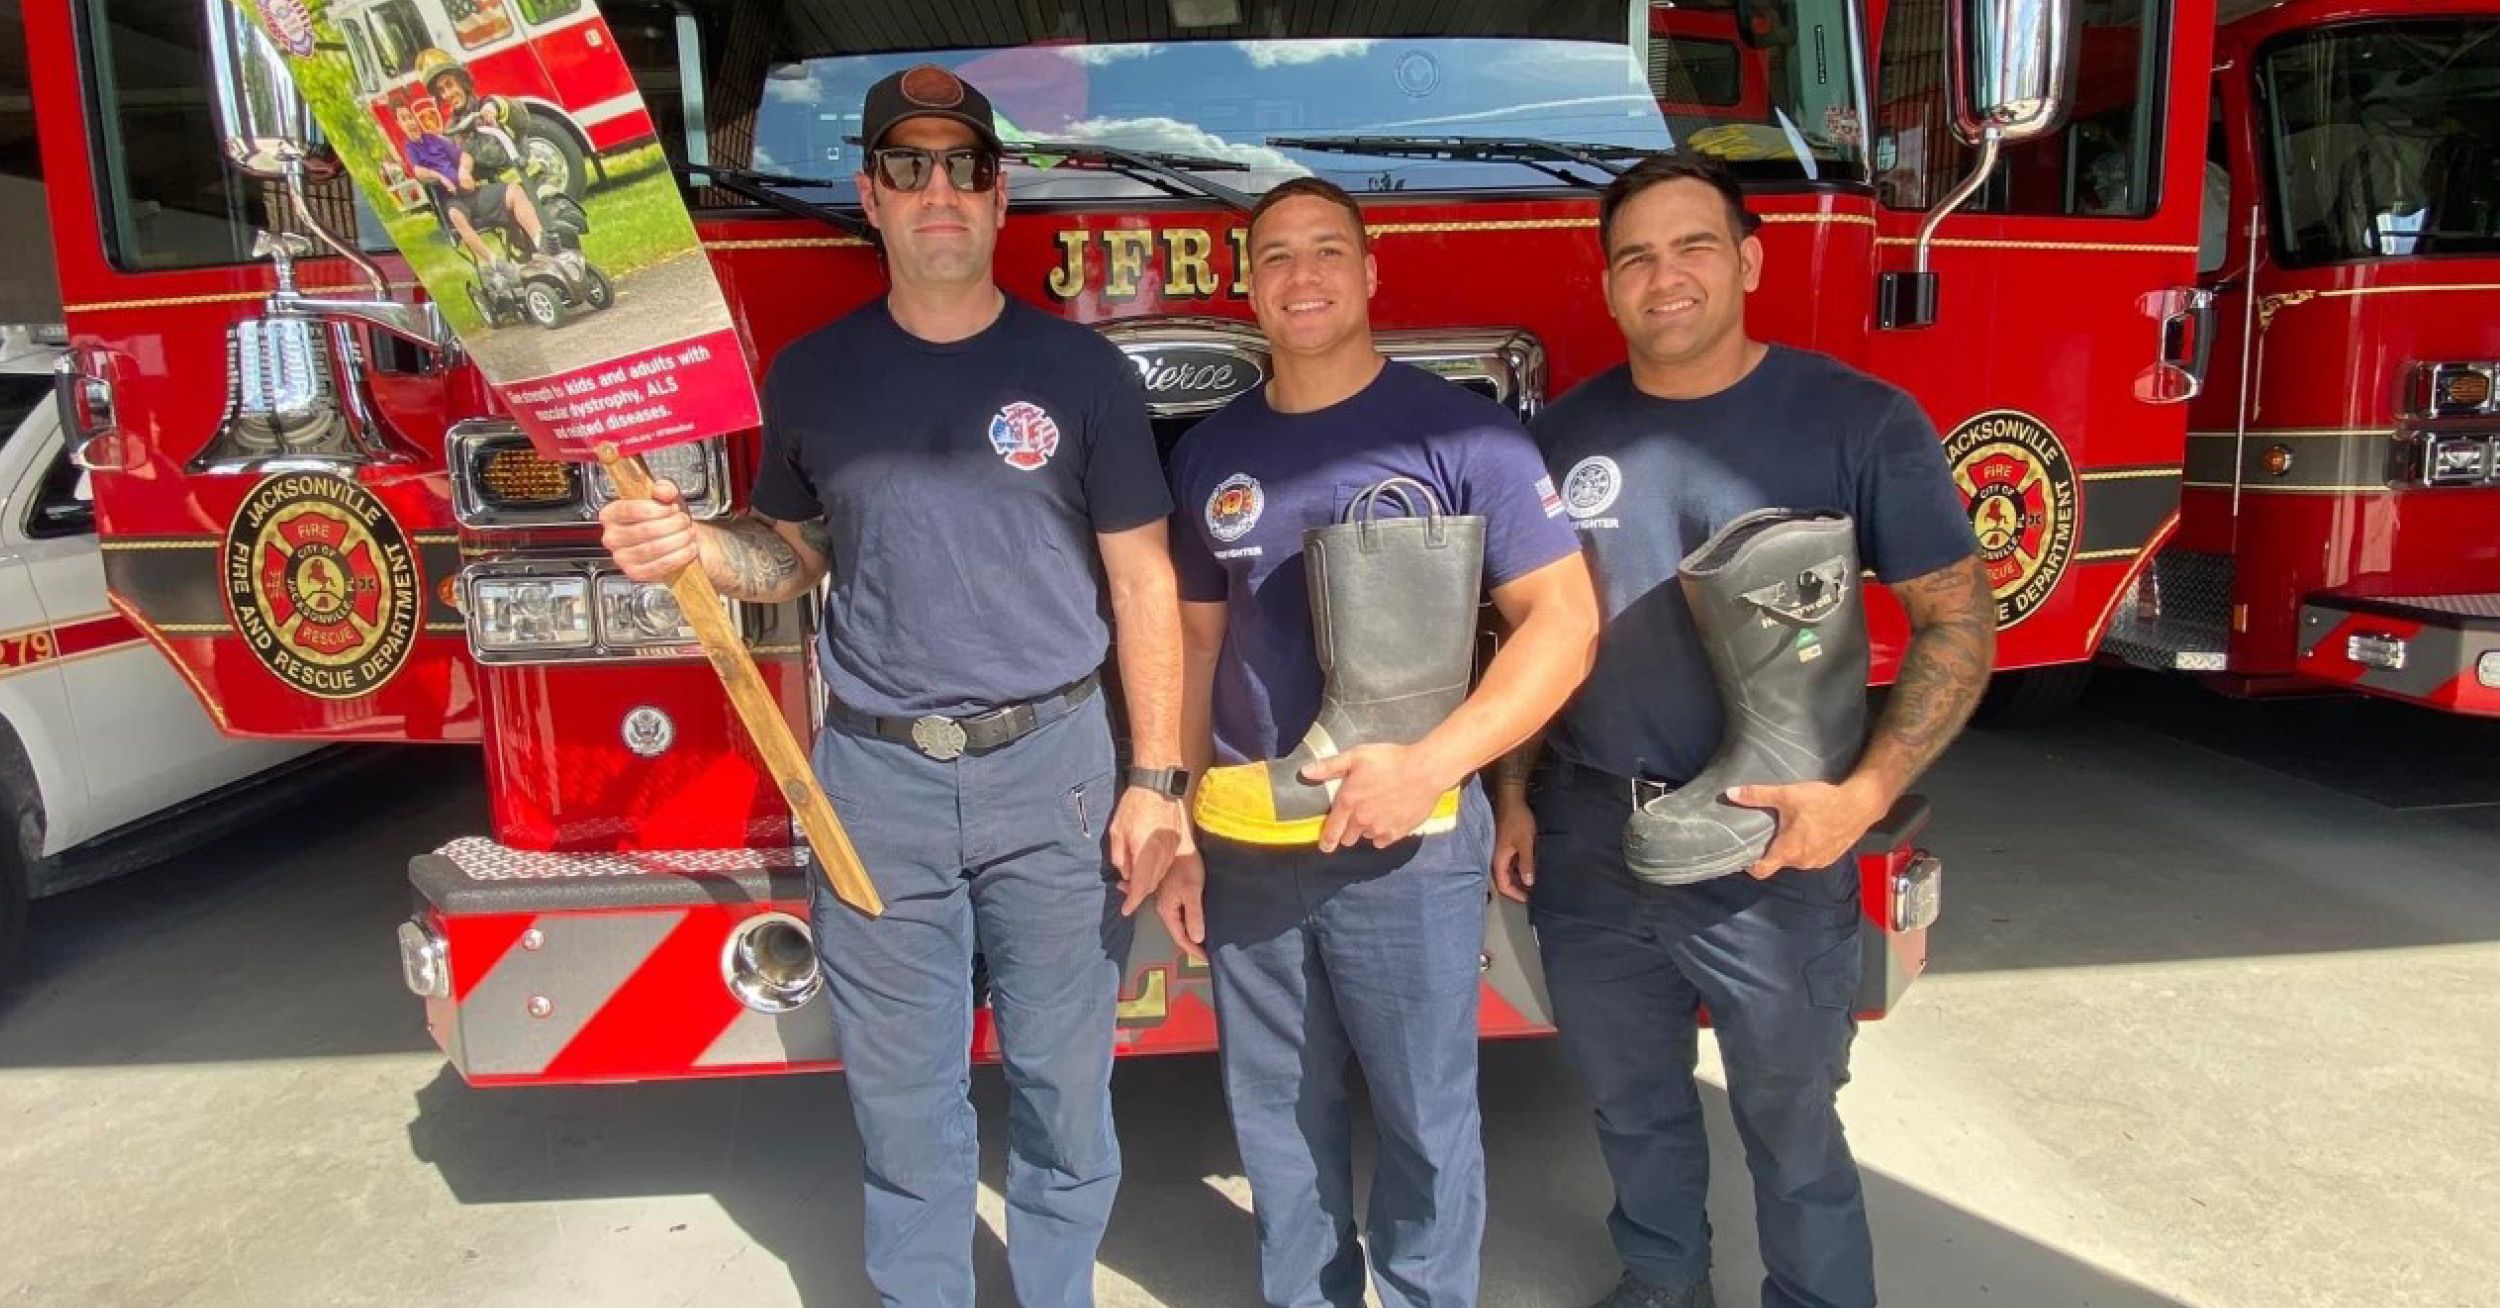 International Association of Fire Fighters & Affiliates Launch ‘Fill the Boot’ Fundraisers Nationwide for  Muscular Dystrophy Association